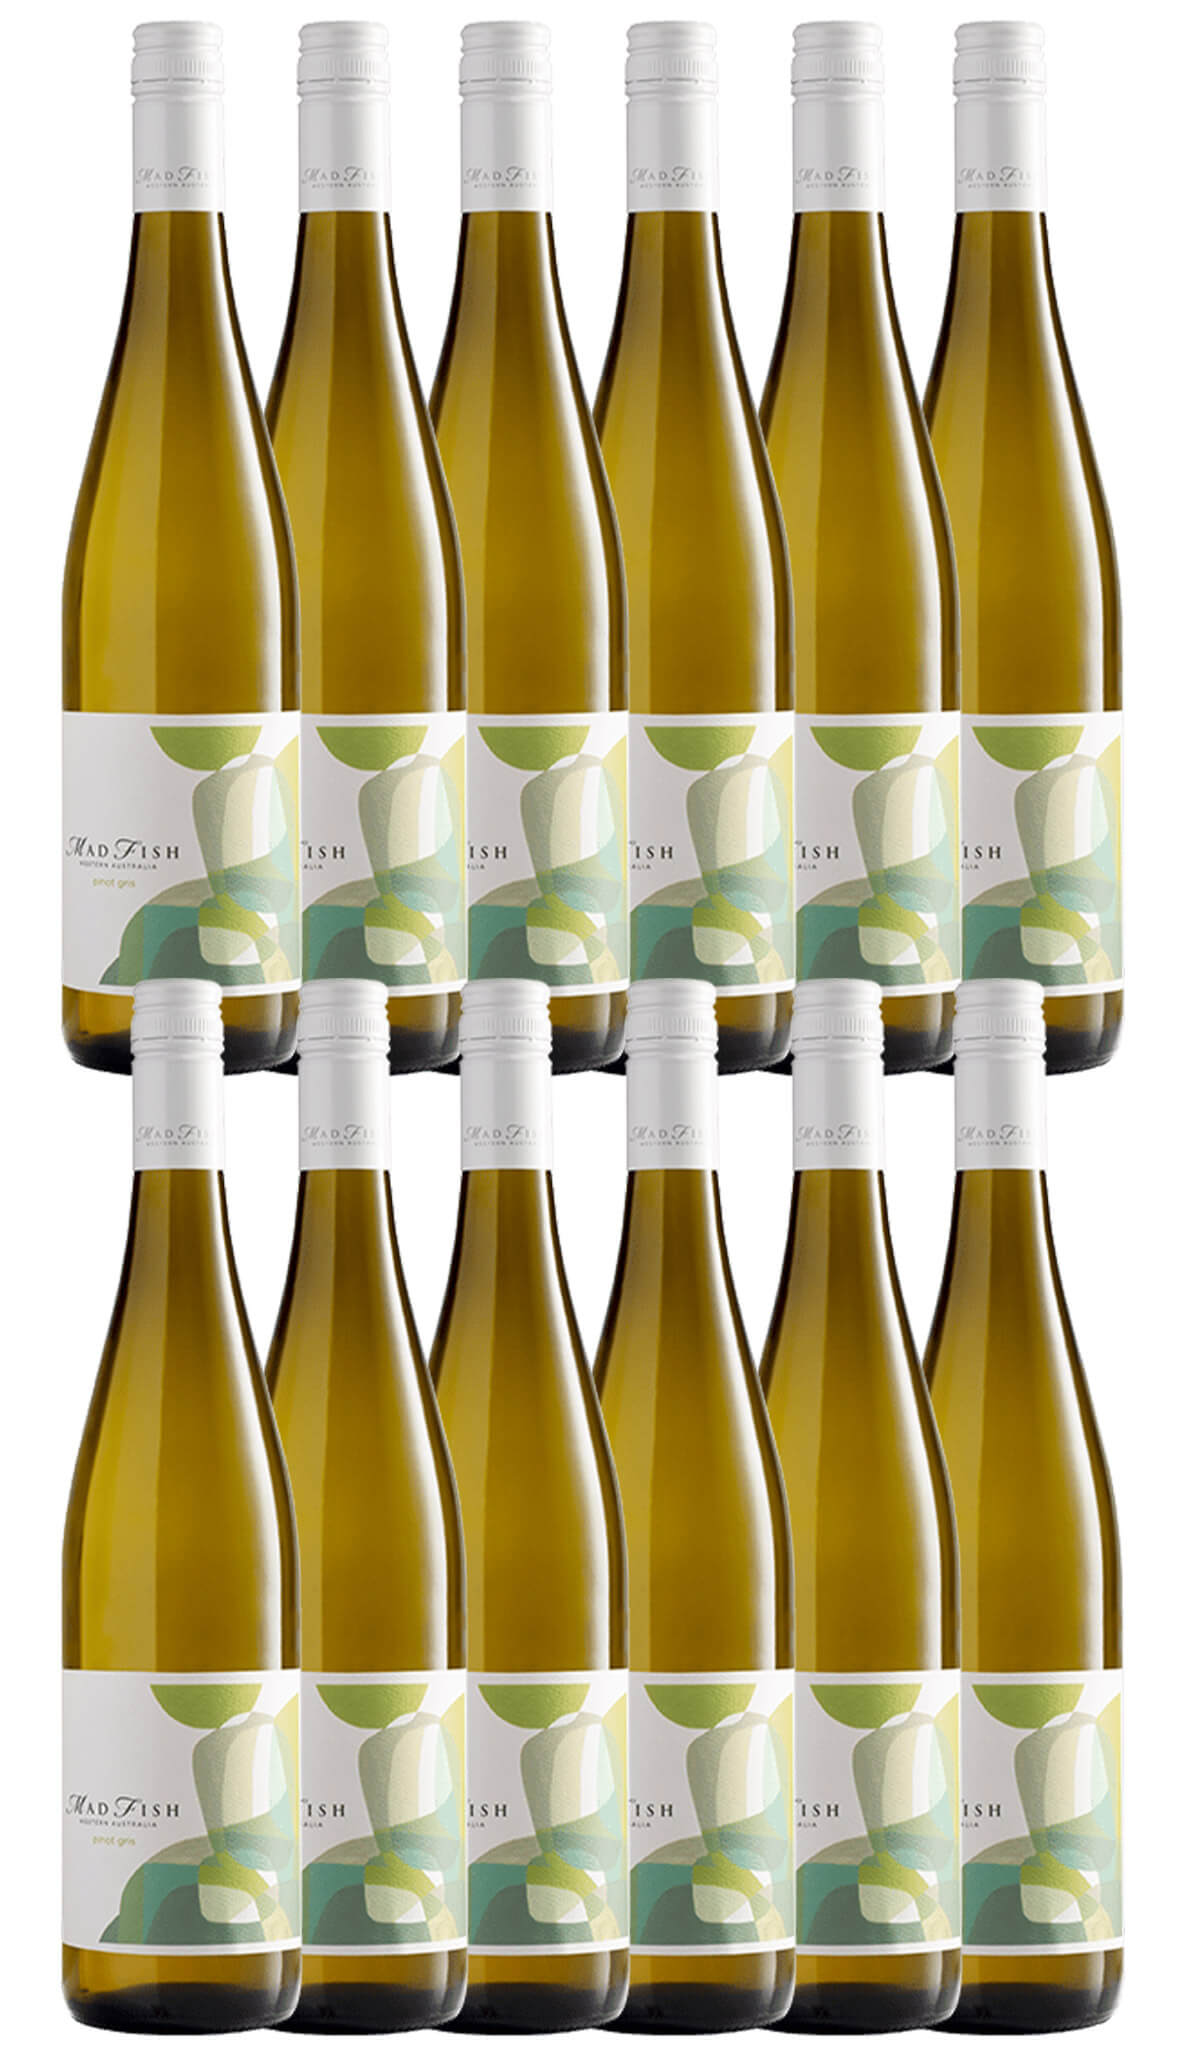 Find out more, explore the range and purchase Mad Fish Pinot Gris 2023 (Margaret River) available online at Wine Sellers Direct - Australia's independent liquor specialists.